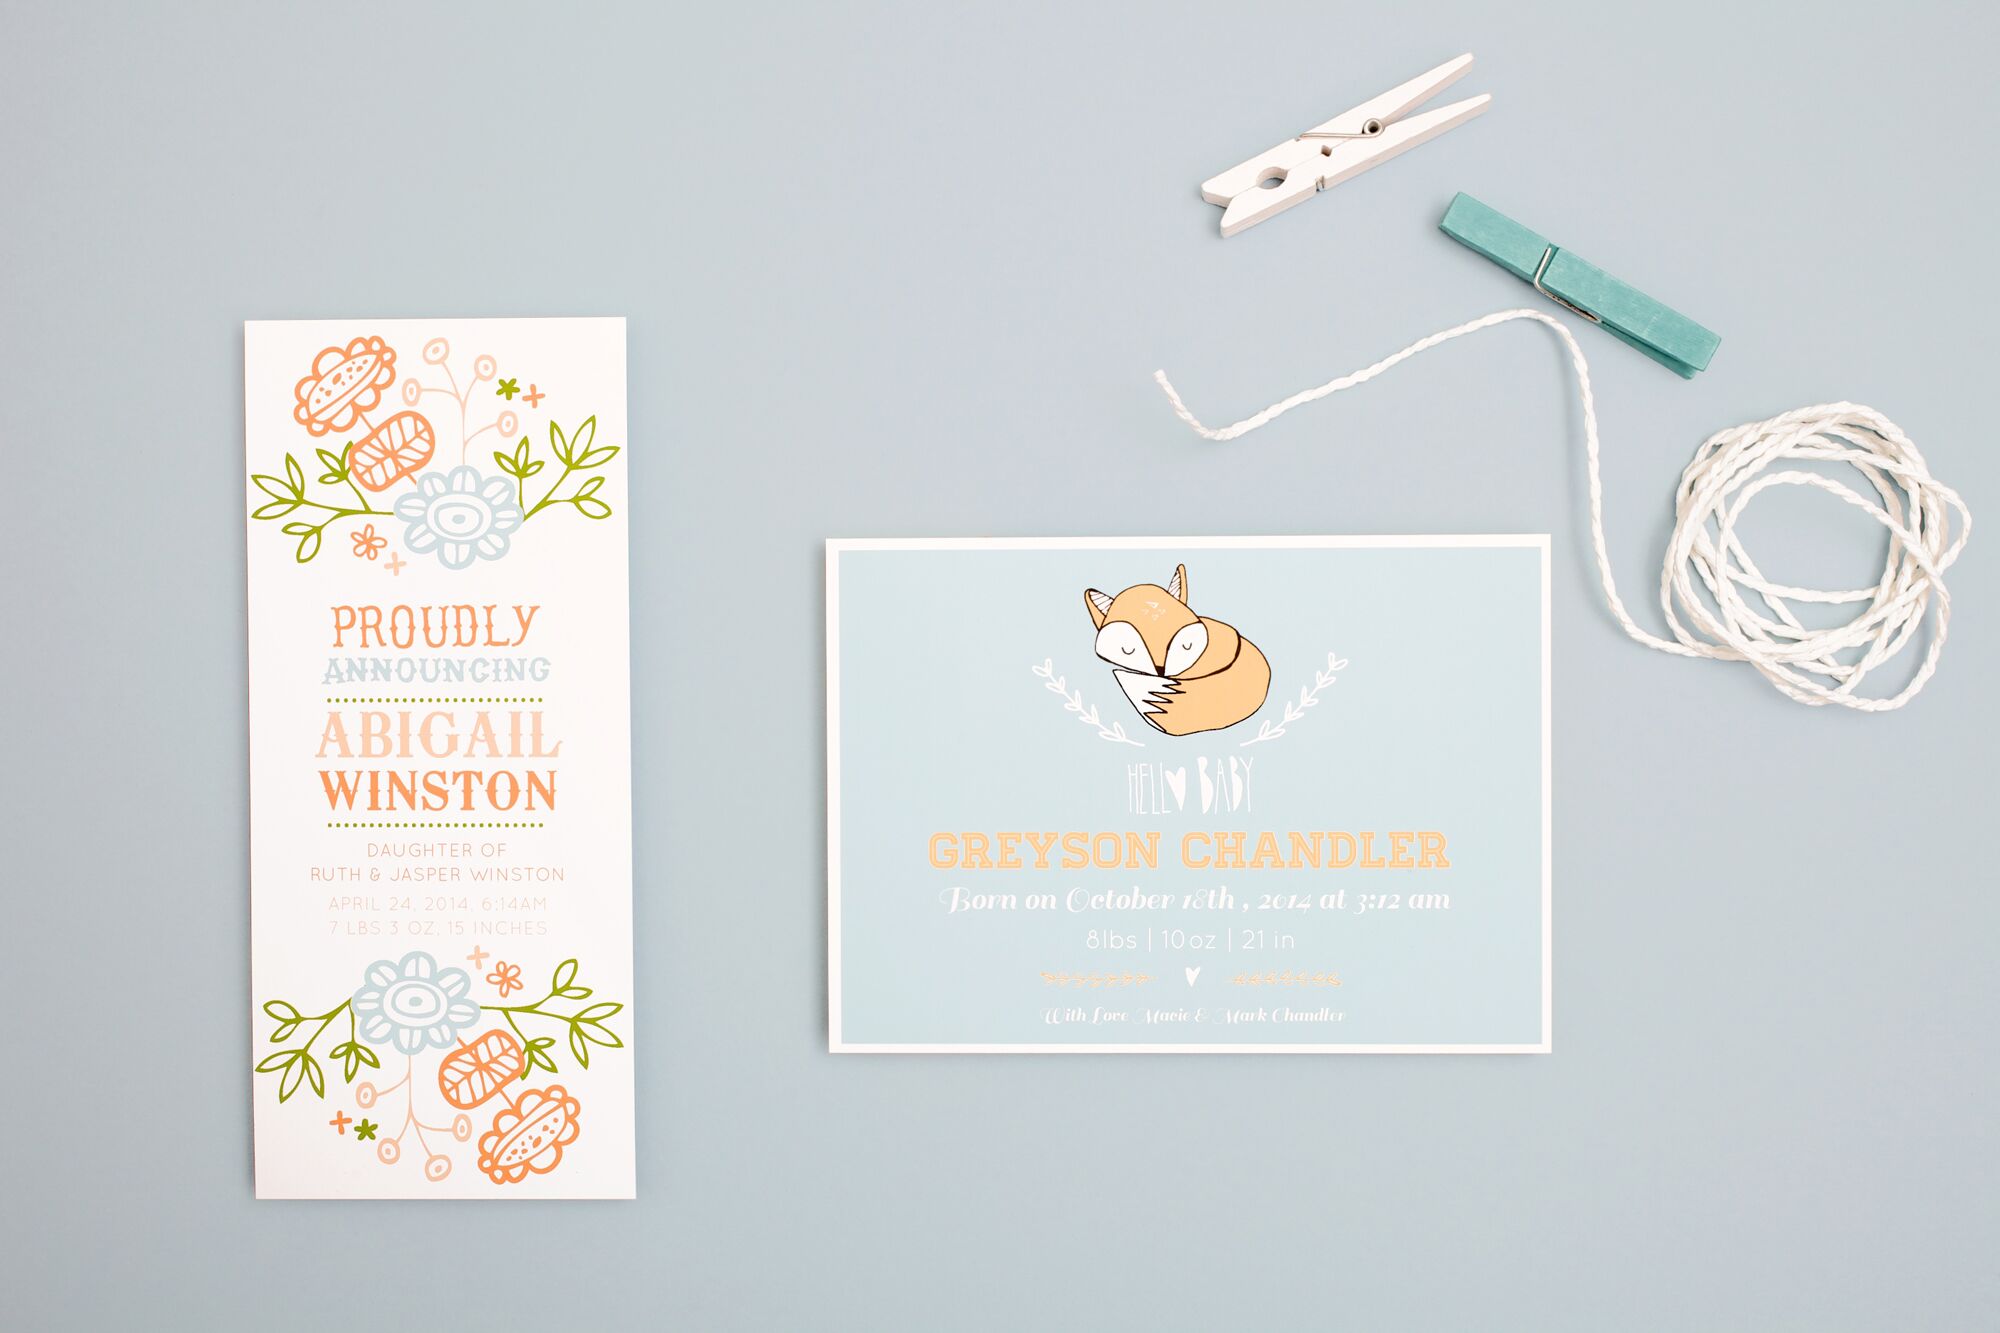 Basic Invite Baby Announcements And First Birthday Invitations